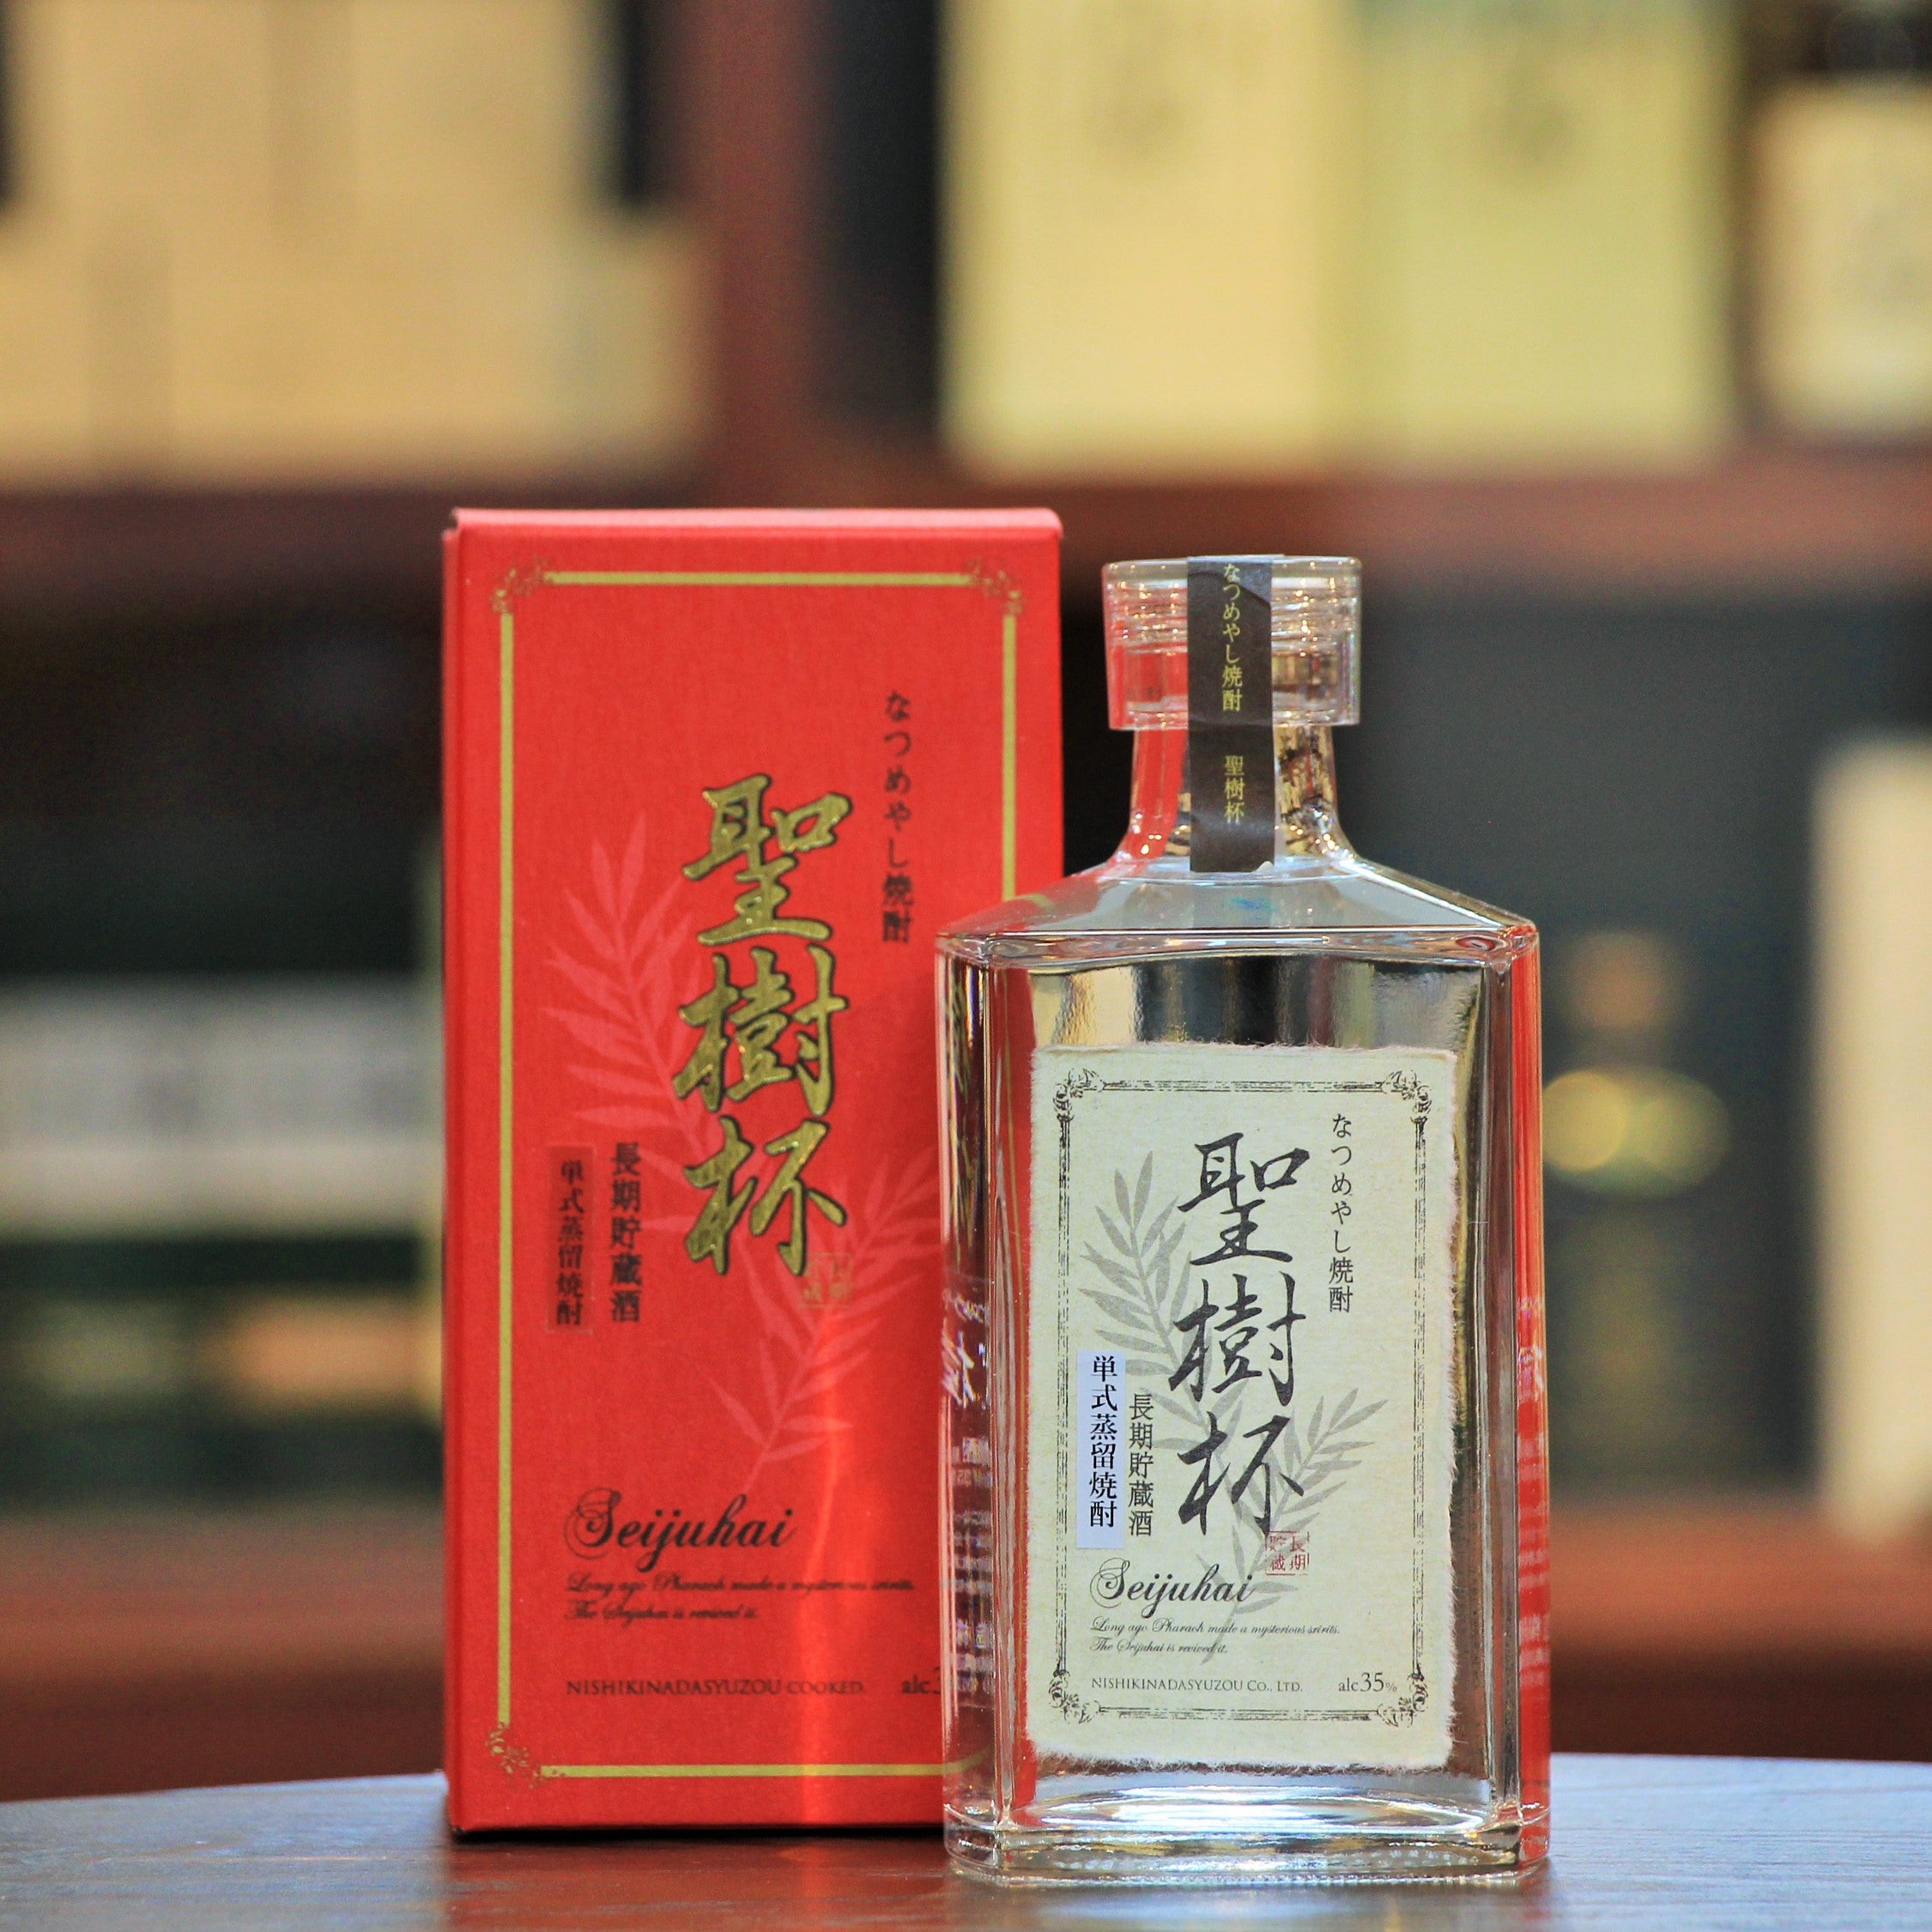 Seijuhai Dates Shochu (Limited), "Arak" is known as the origin of distilled sprits. An ancient  mediterranean drink it was distilled from Dates. A special distillation process to produce Arak "Seijuhai" from the Japanese perspective gives a fruity aroma, mild & smooth Shochu drink.  It's 100% date Shochu. 